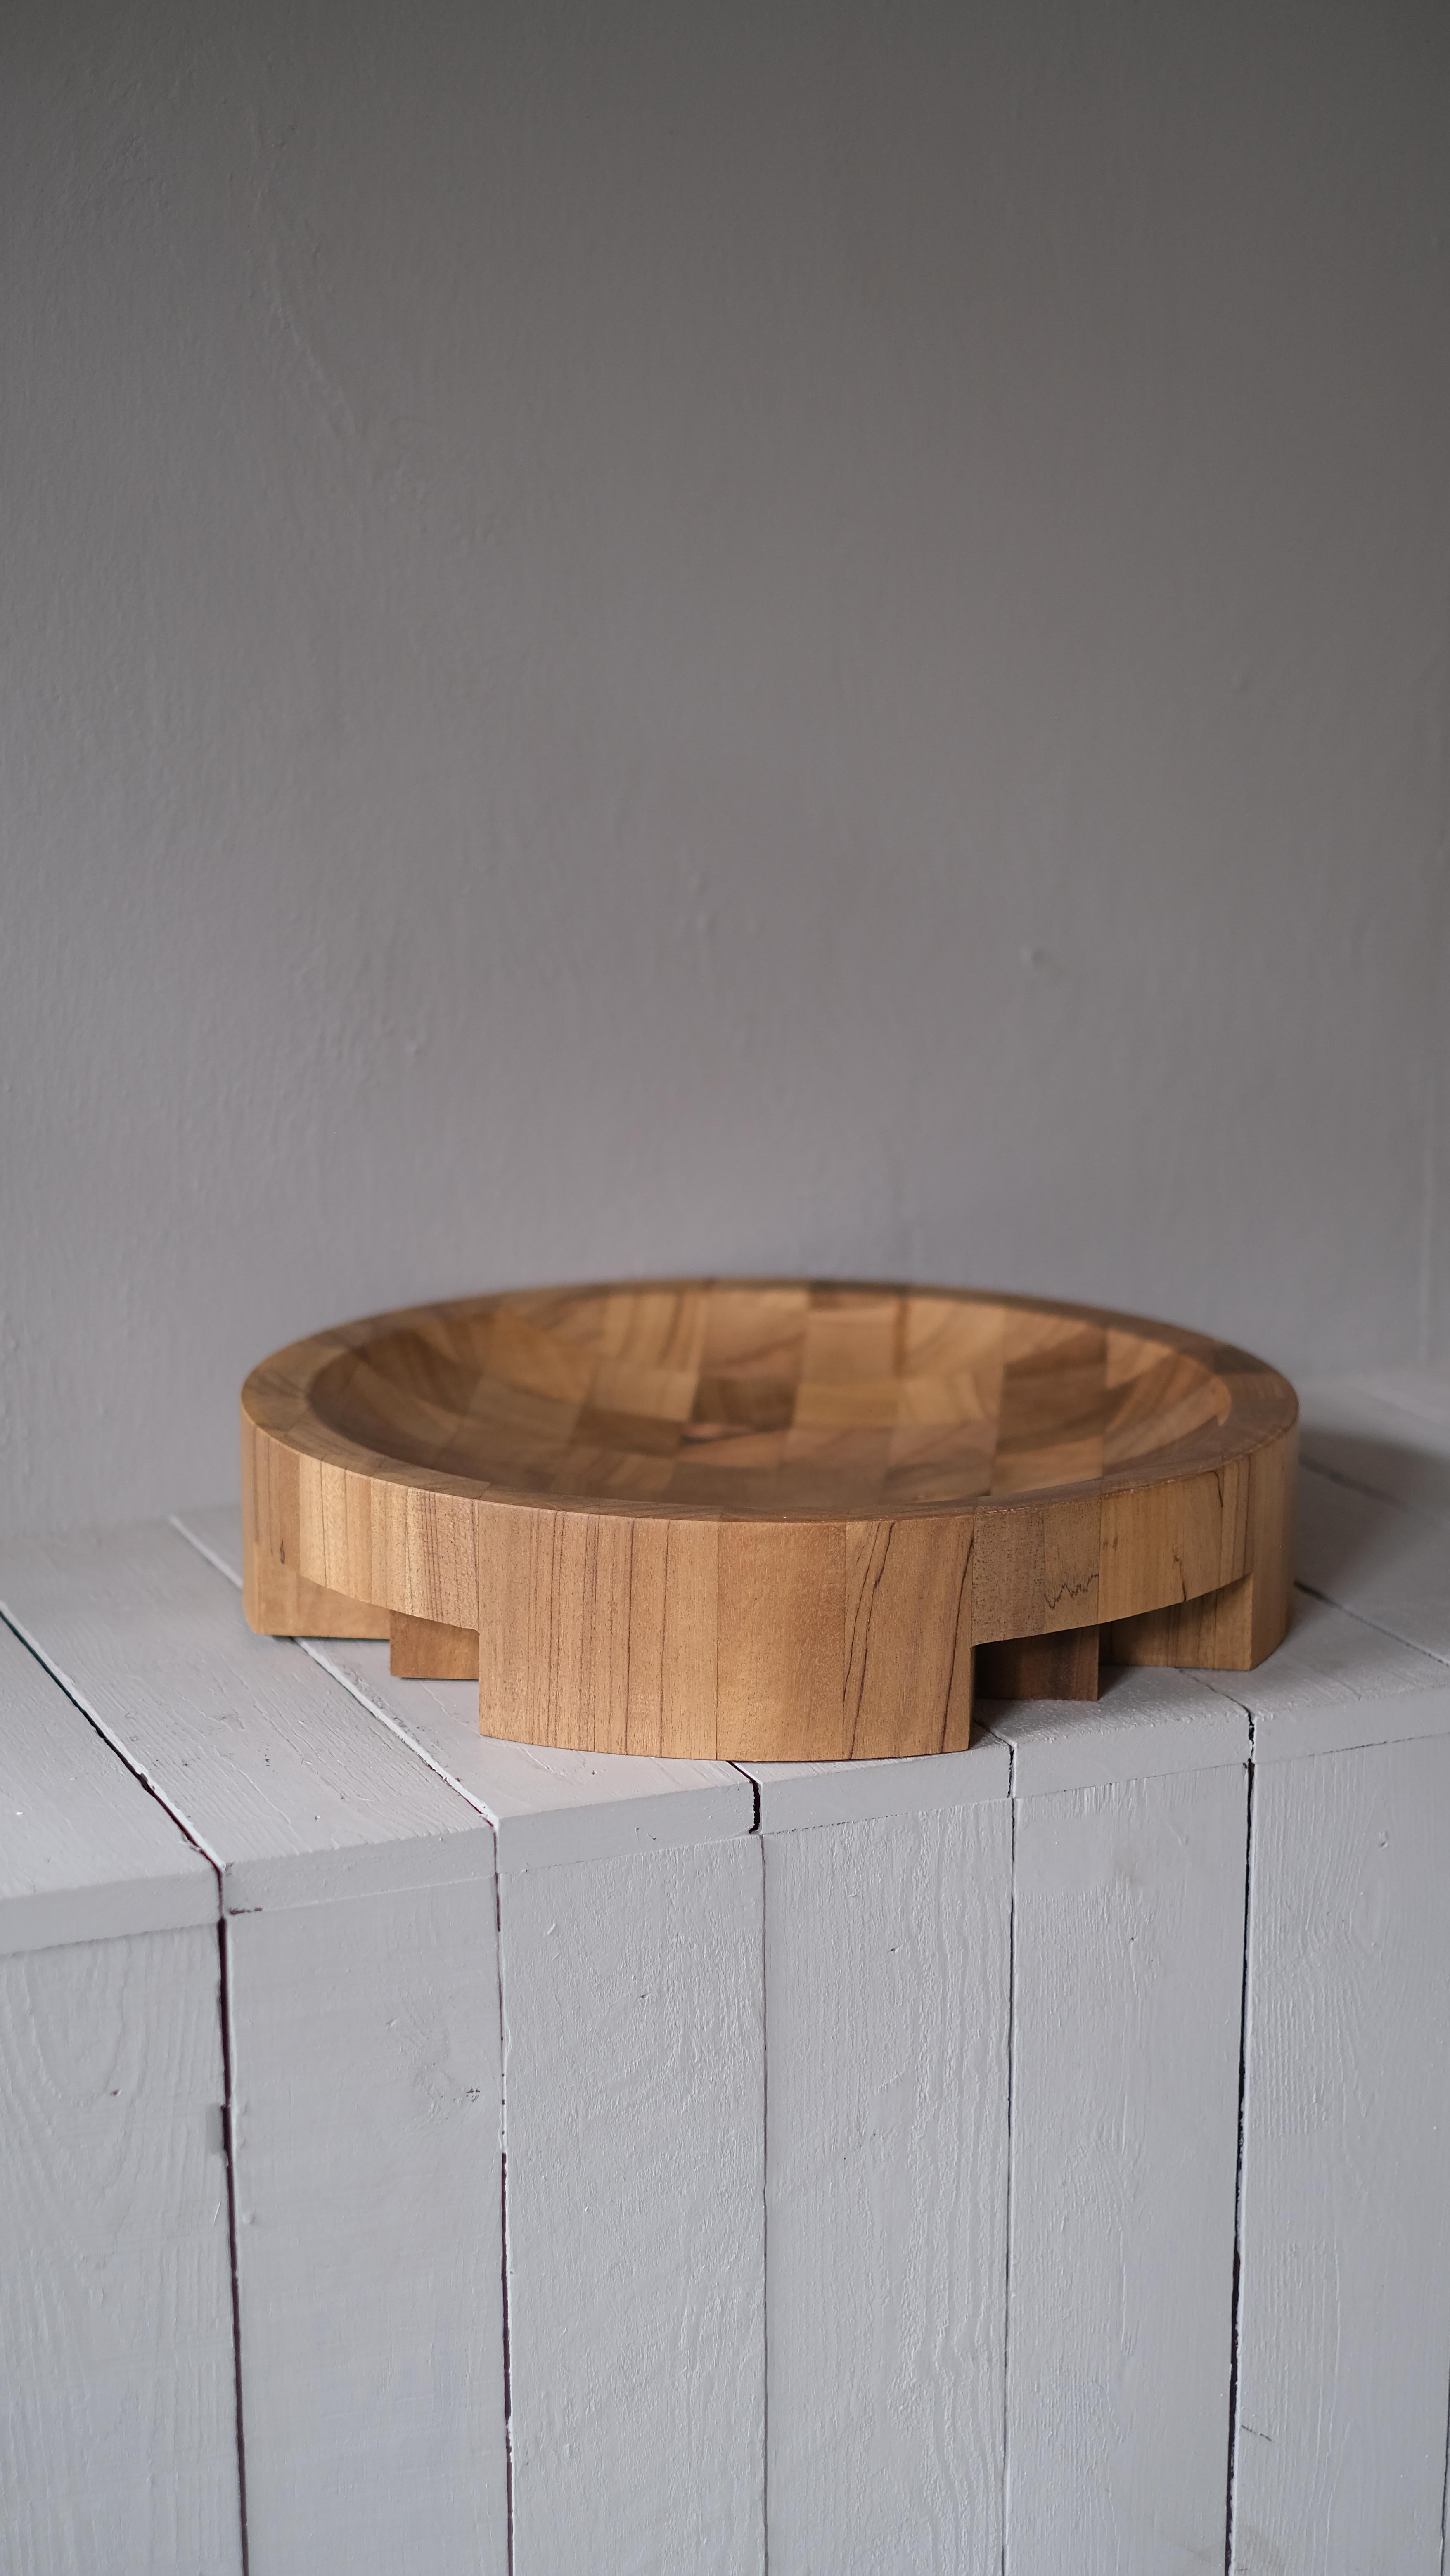 Disk Tray African walnut large by Arno Declercq
Dimensions: D43 x W43 x H9 cm
Meterials: African walnut
Signed by Arno Declercq

Arno Declercq
Belgian designer and art dealer who makes bespoke objects with passion for design, atmosphere,